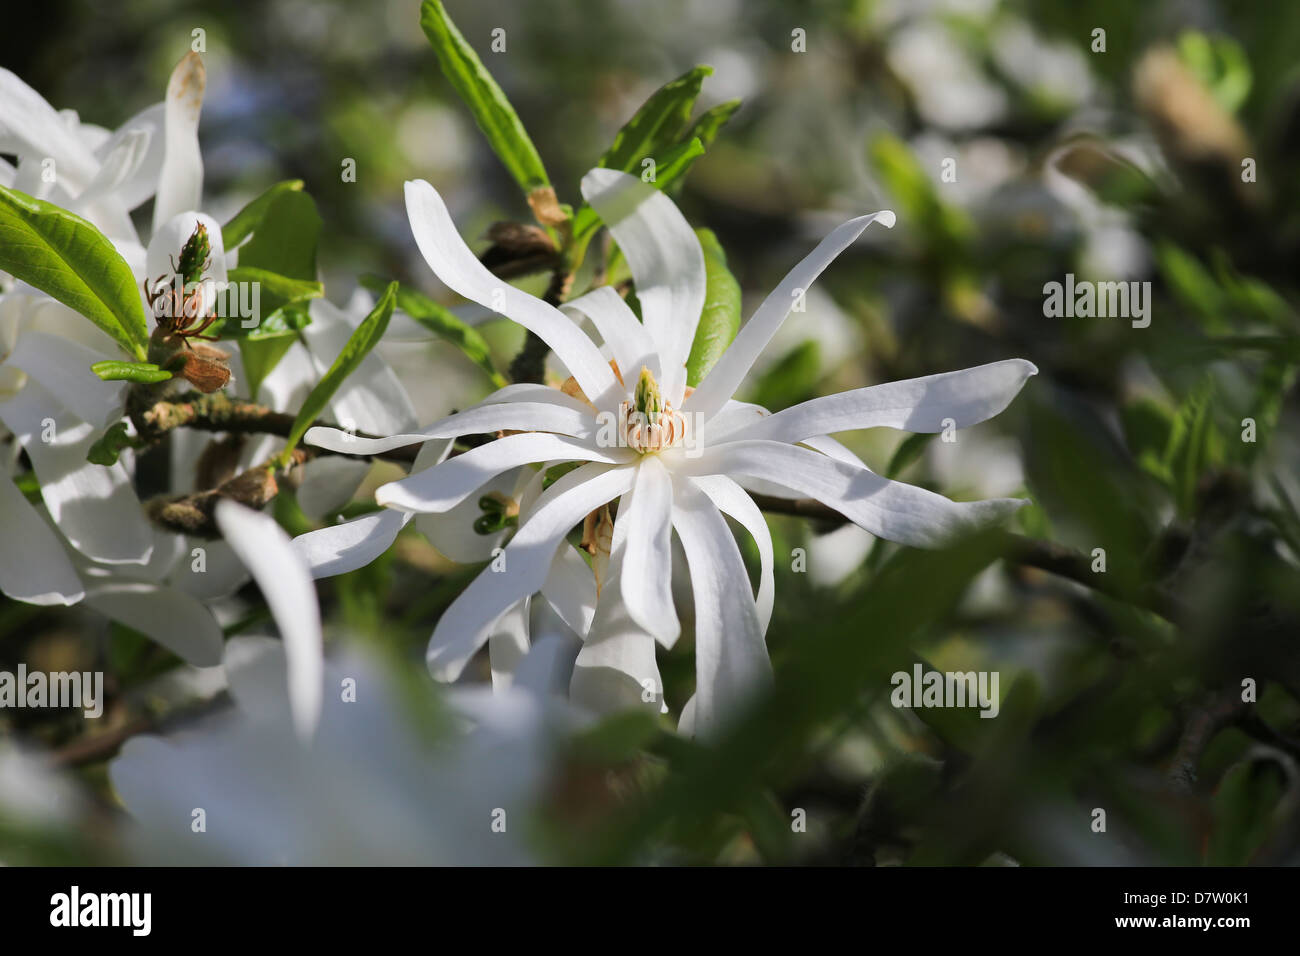 Magnolia Royal Star with snowy-white double-flowers Stock Photo